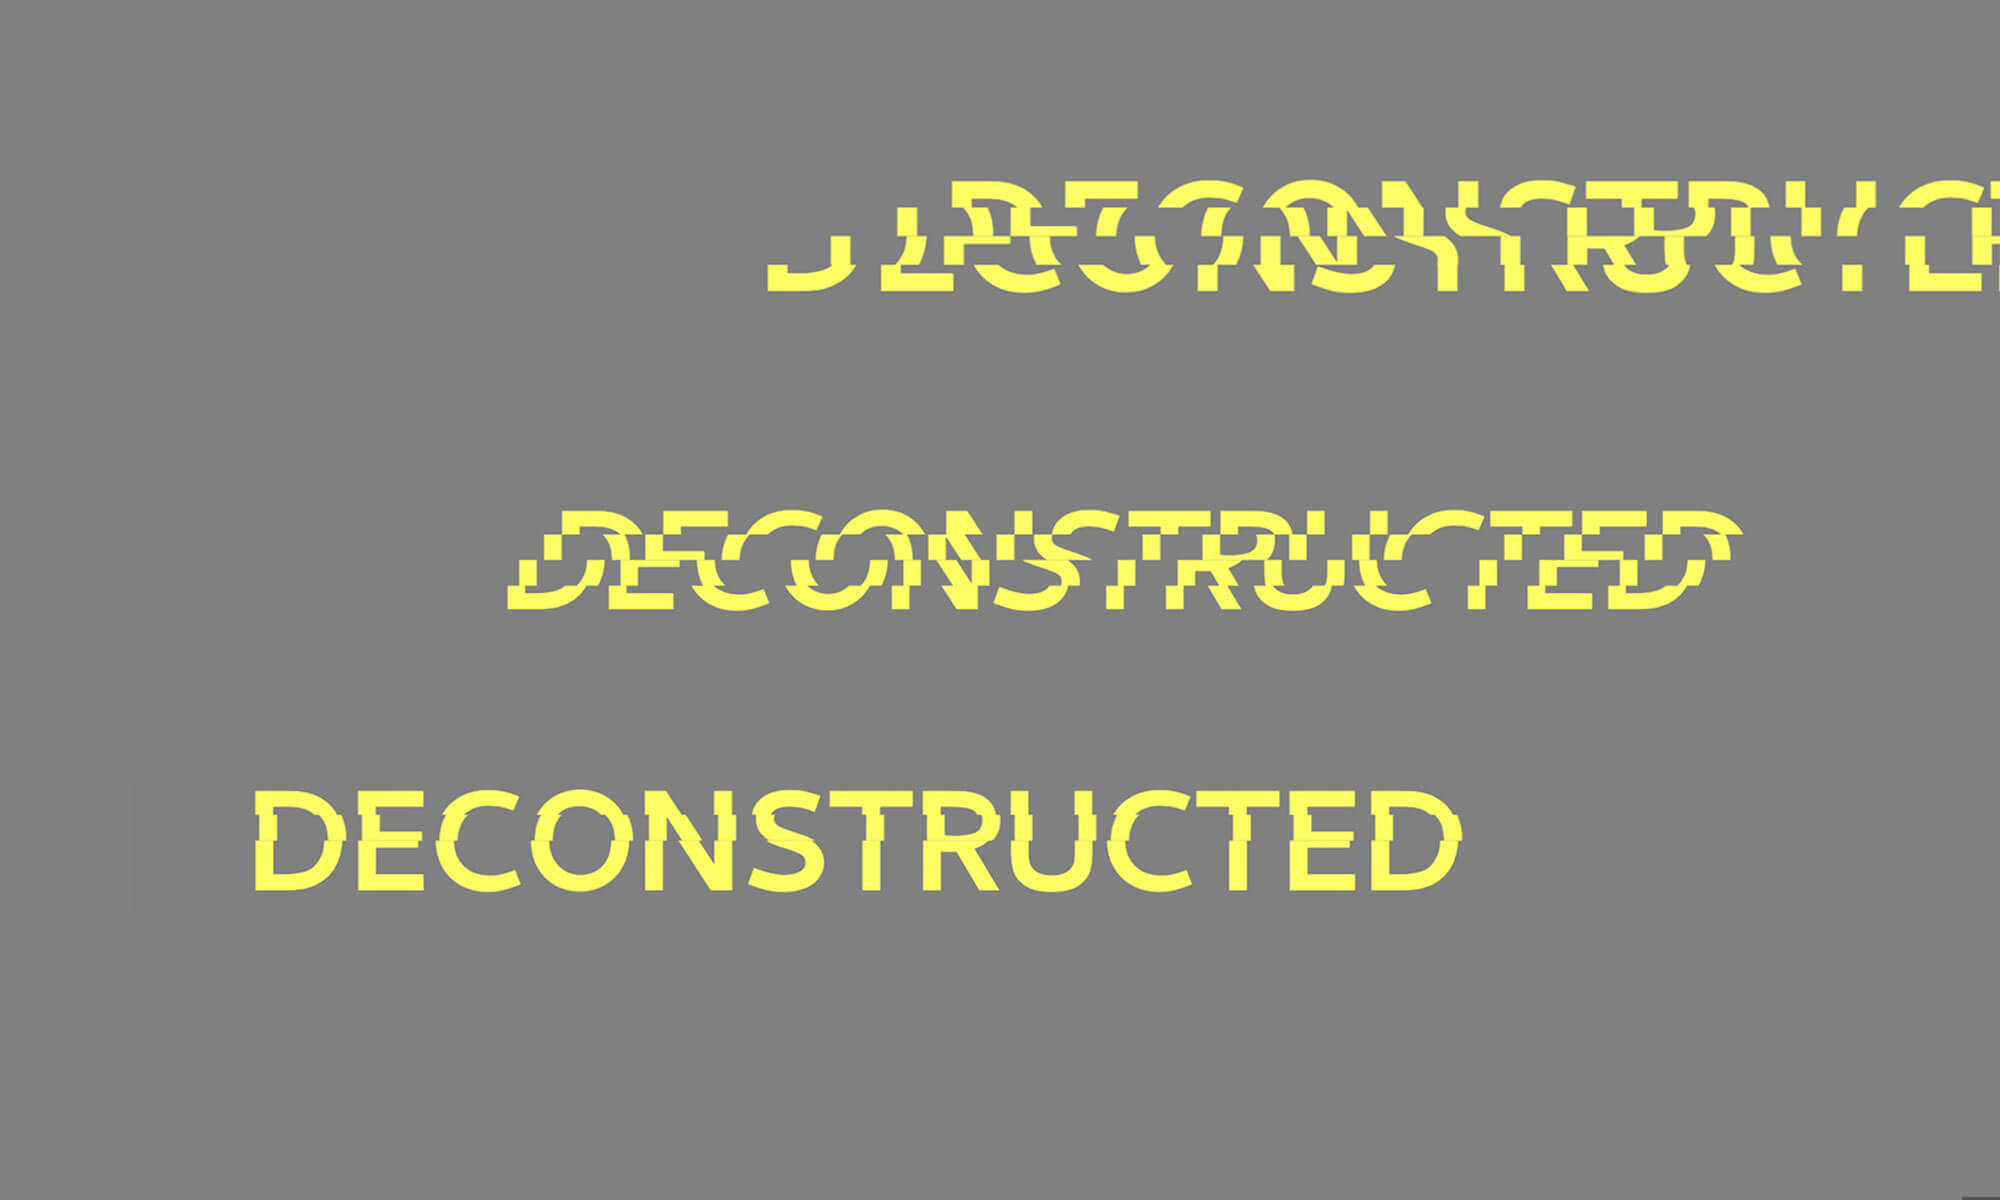 Deconstructed Text Animation